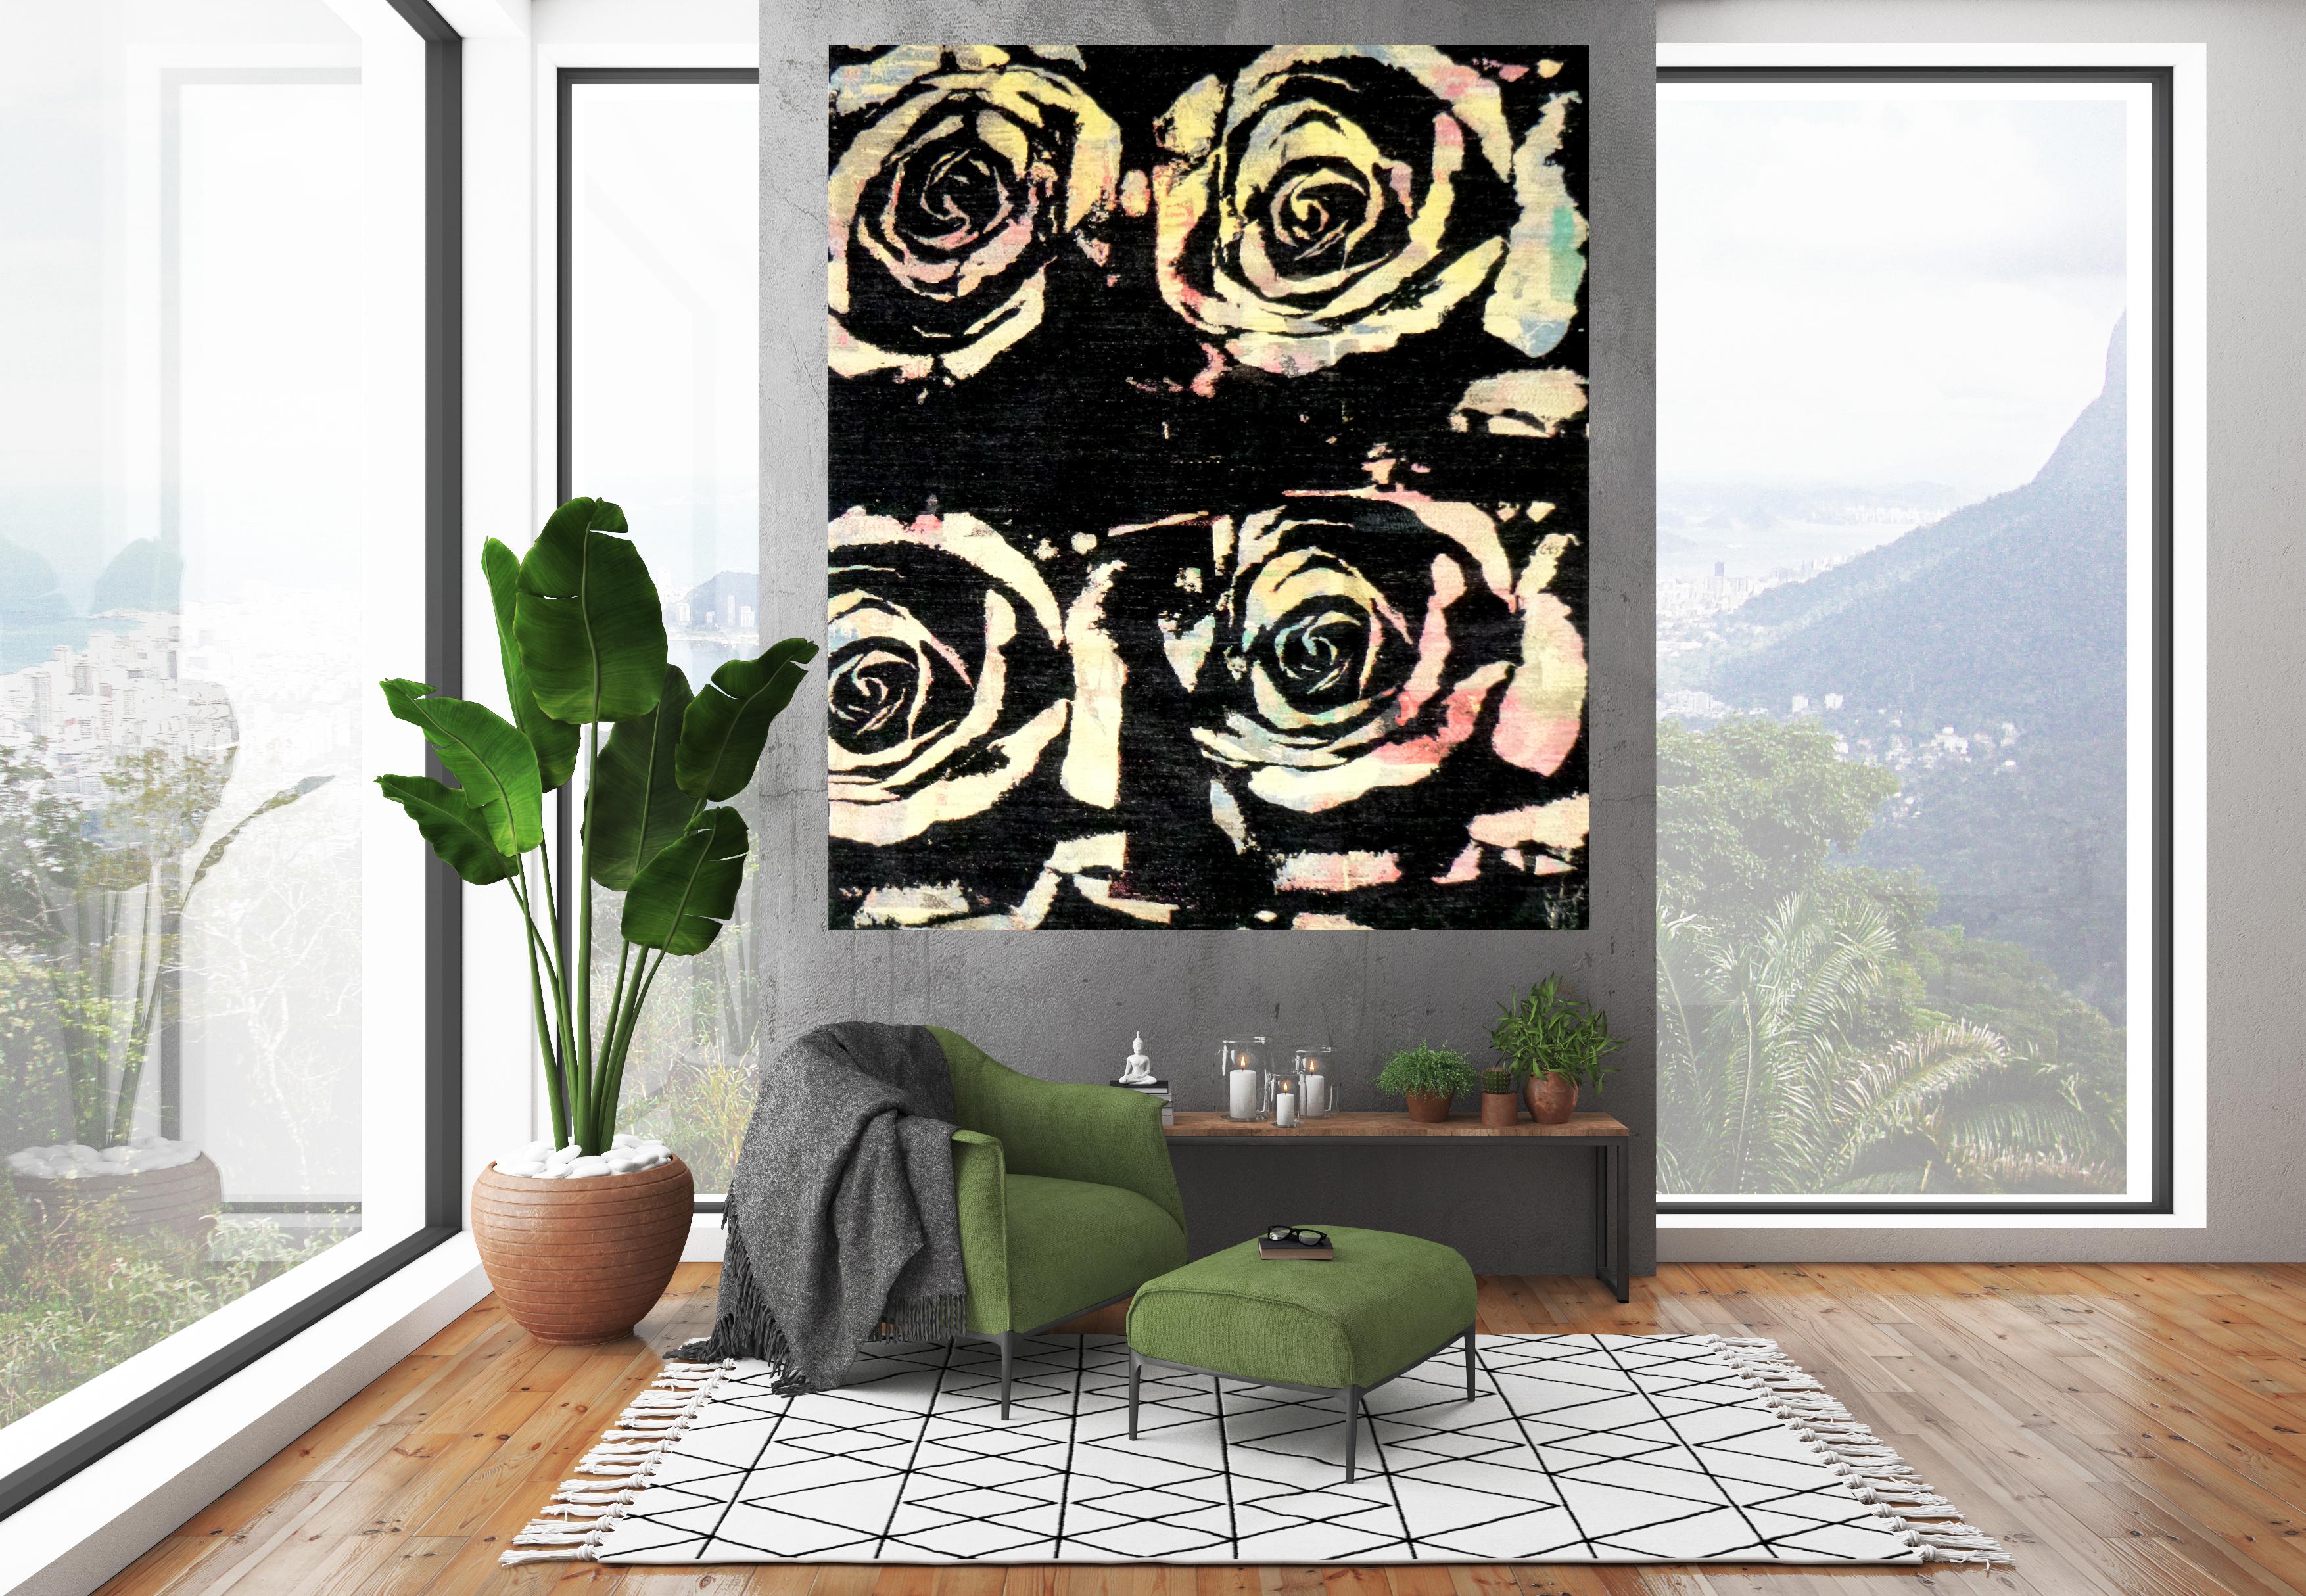 Seek One's art woven into beautiful hand crafted rug, created in Afghanistan of Ghazni Wool.   Limited edition of 10.  The artist photographed the roses and then gave them his signature pop style.   The piece can hang vertically or horizontally or